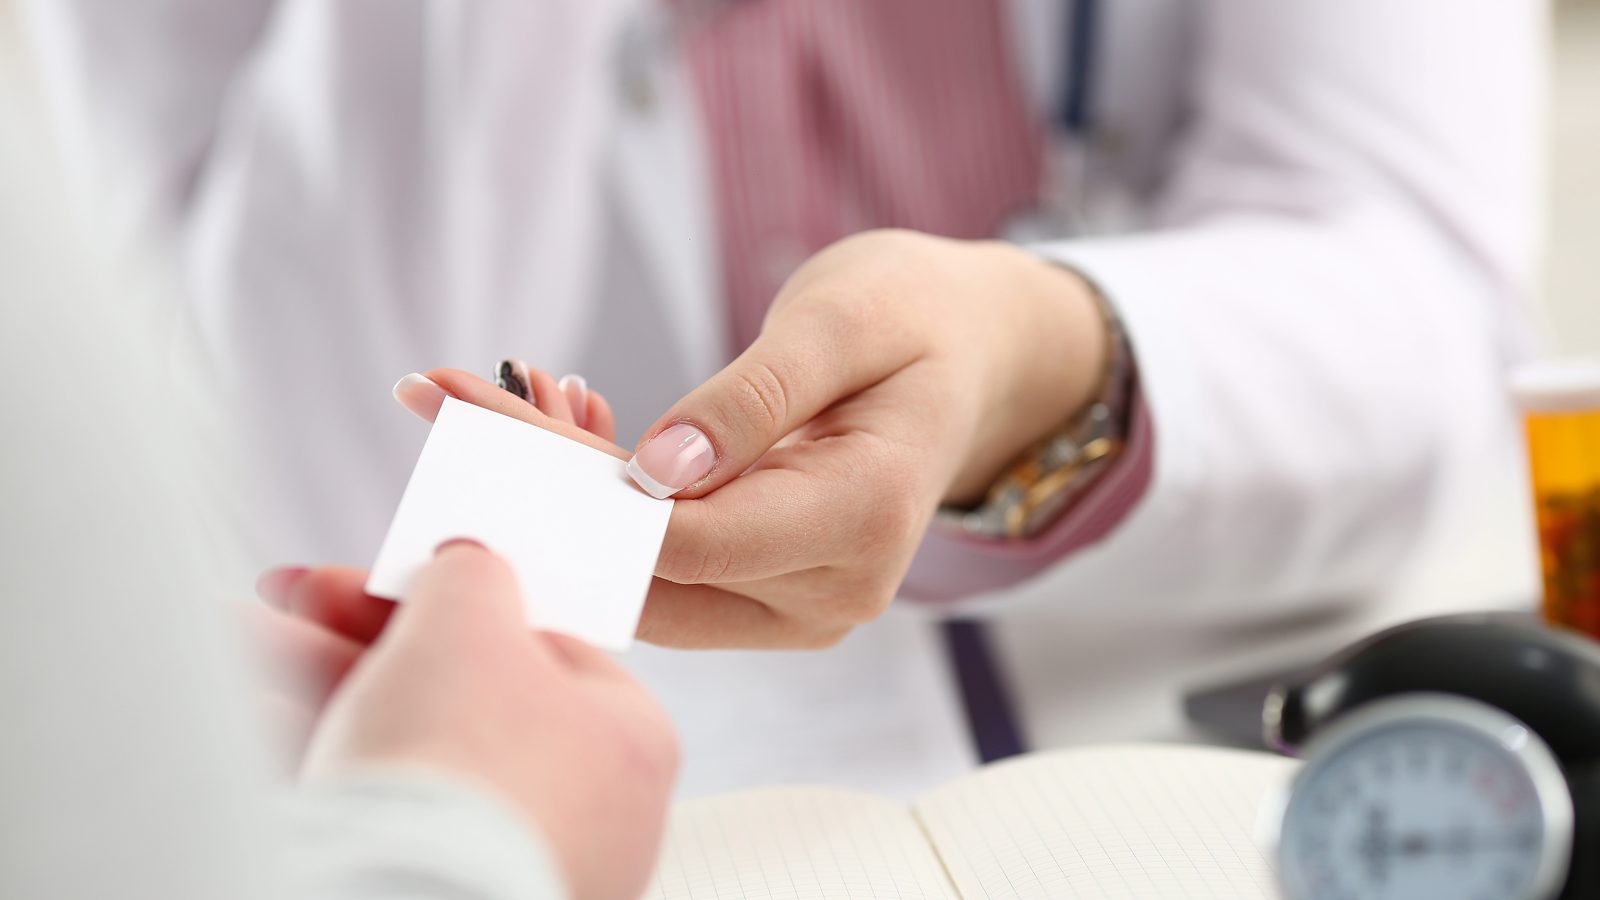 Female Doctor Hands Over White Card To Patient